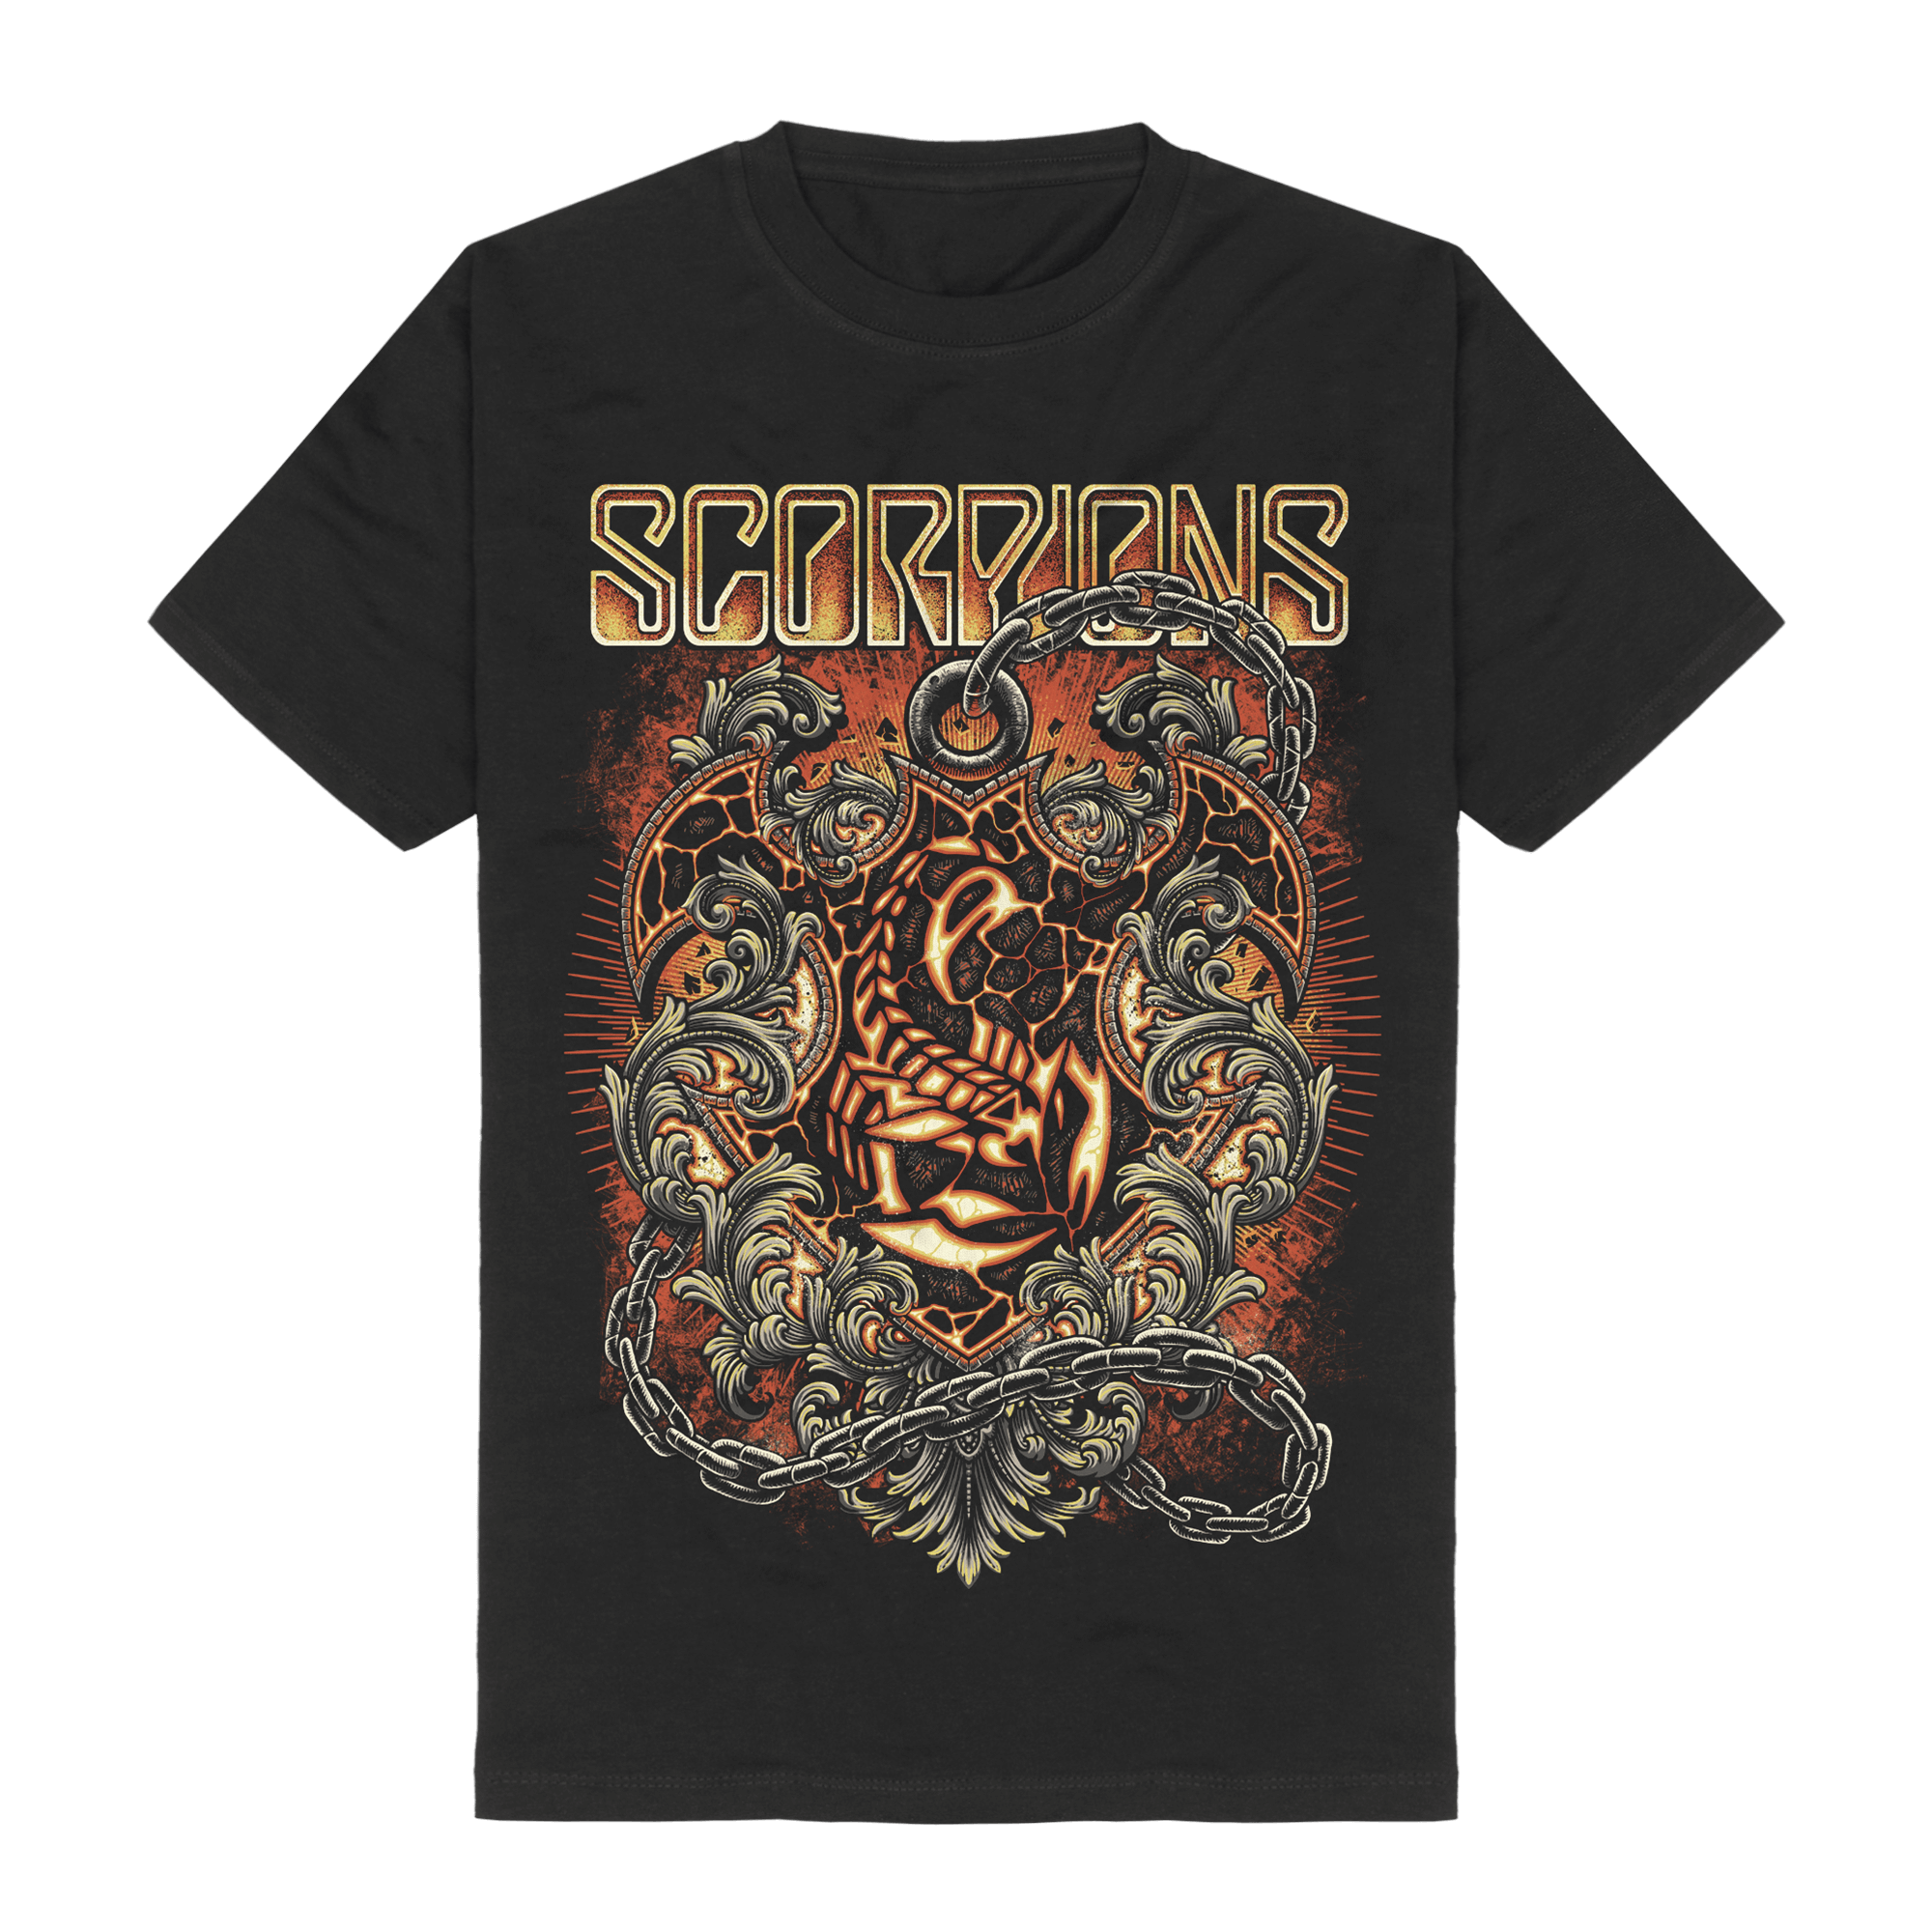 Crest in Chains T-Shirt - Scorpions Official Store